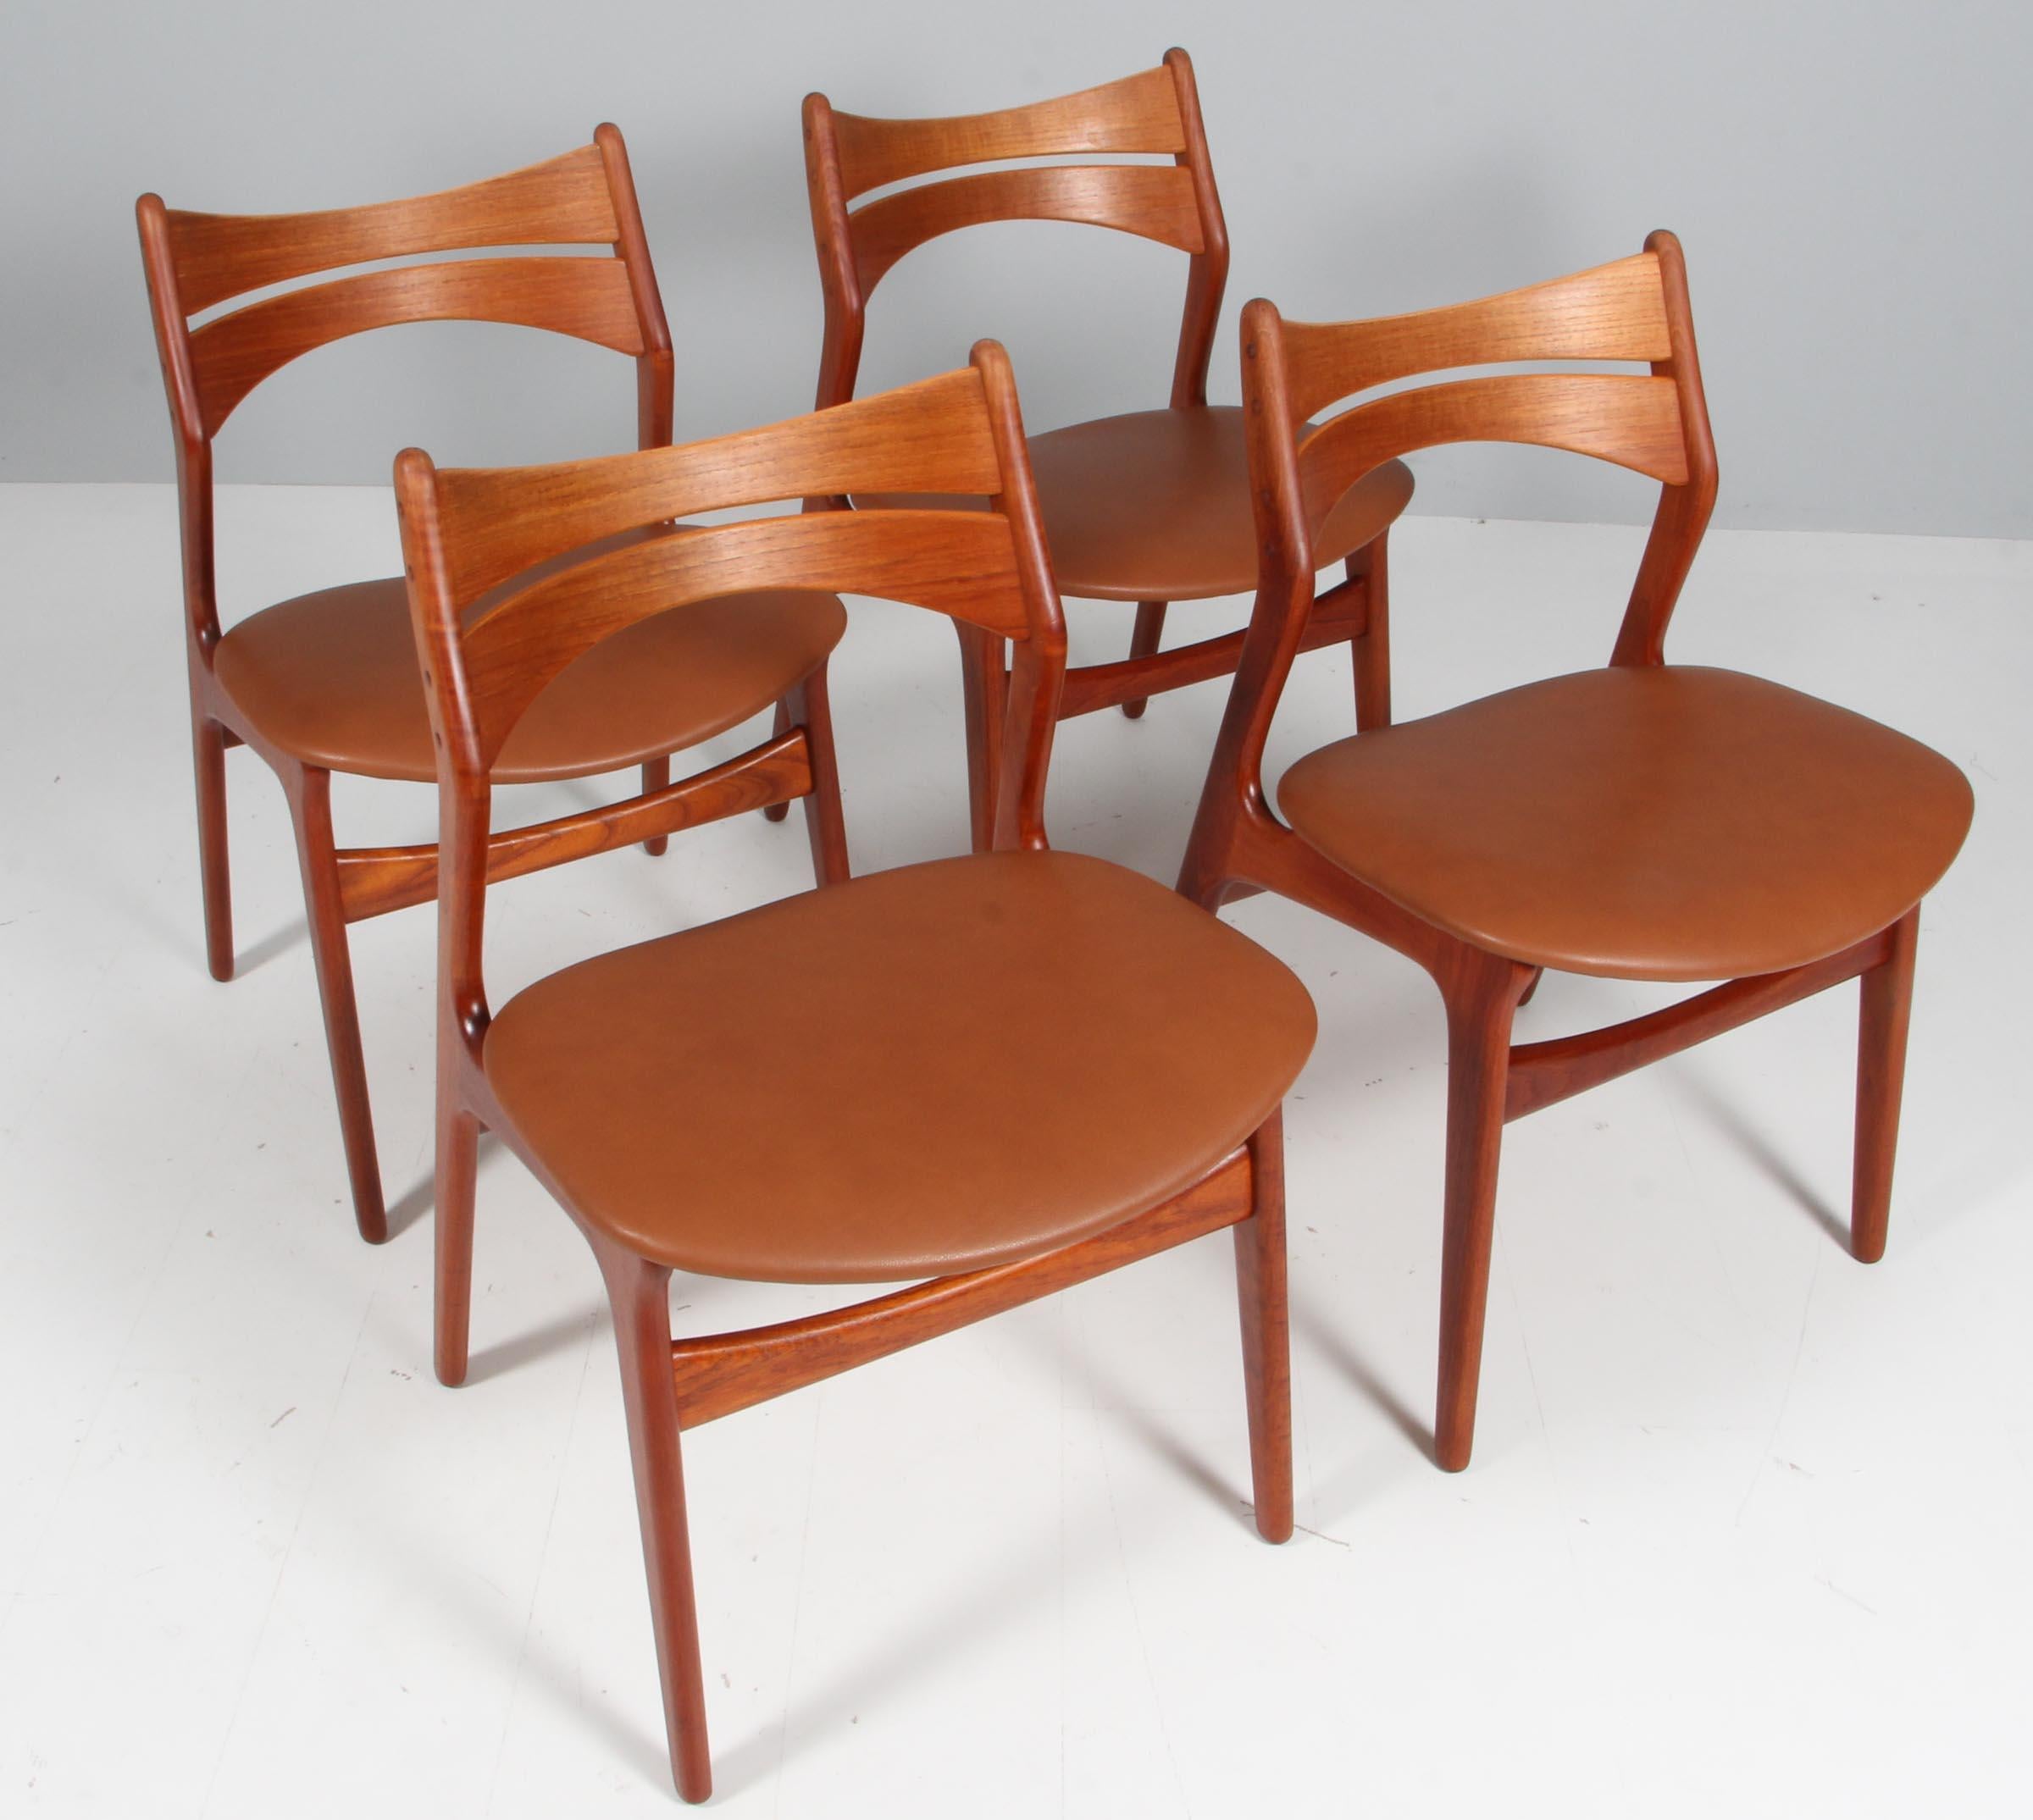 Eight Eric Buch chairs with frame of partly solid teak.

New upholstered with vintage tan aniline leather. 

Model 310, made by Chr Christensens Møbelfabrik, Denmark.